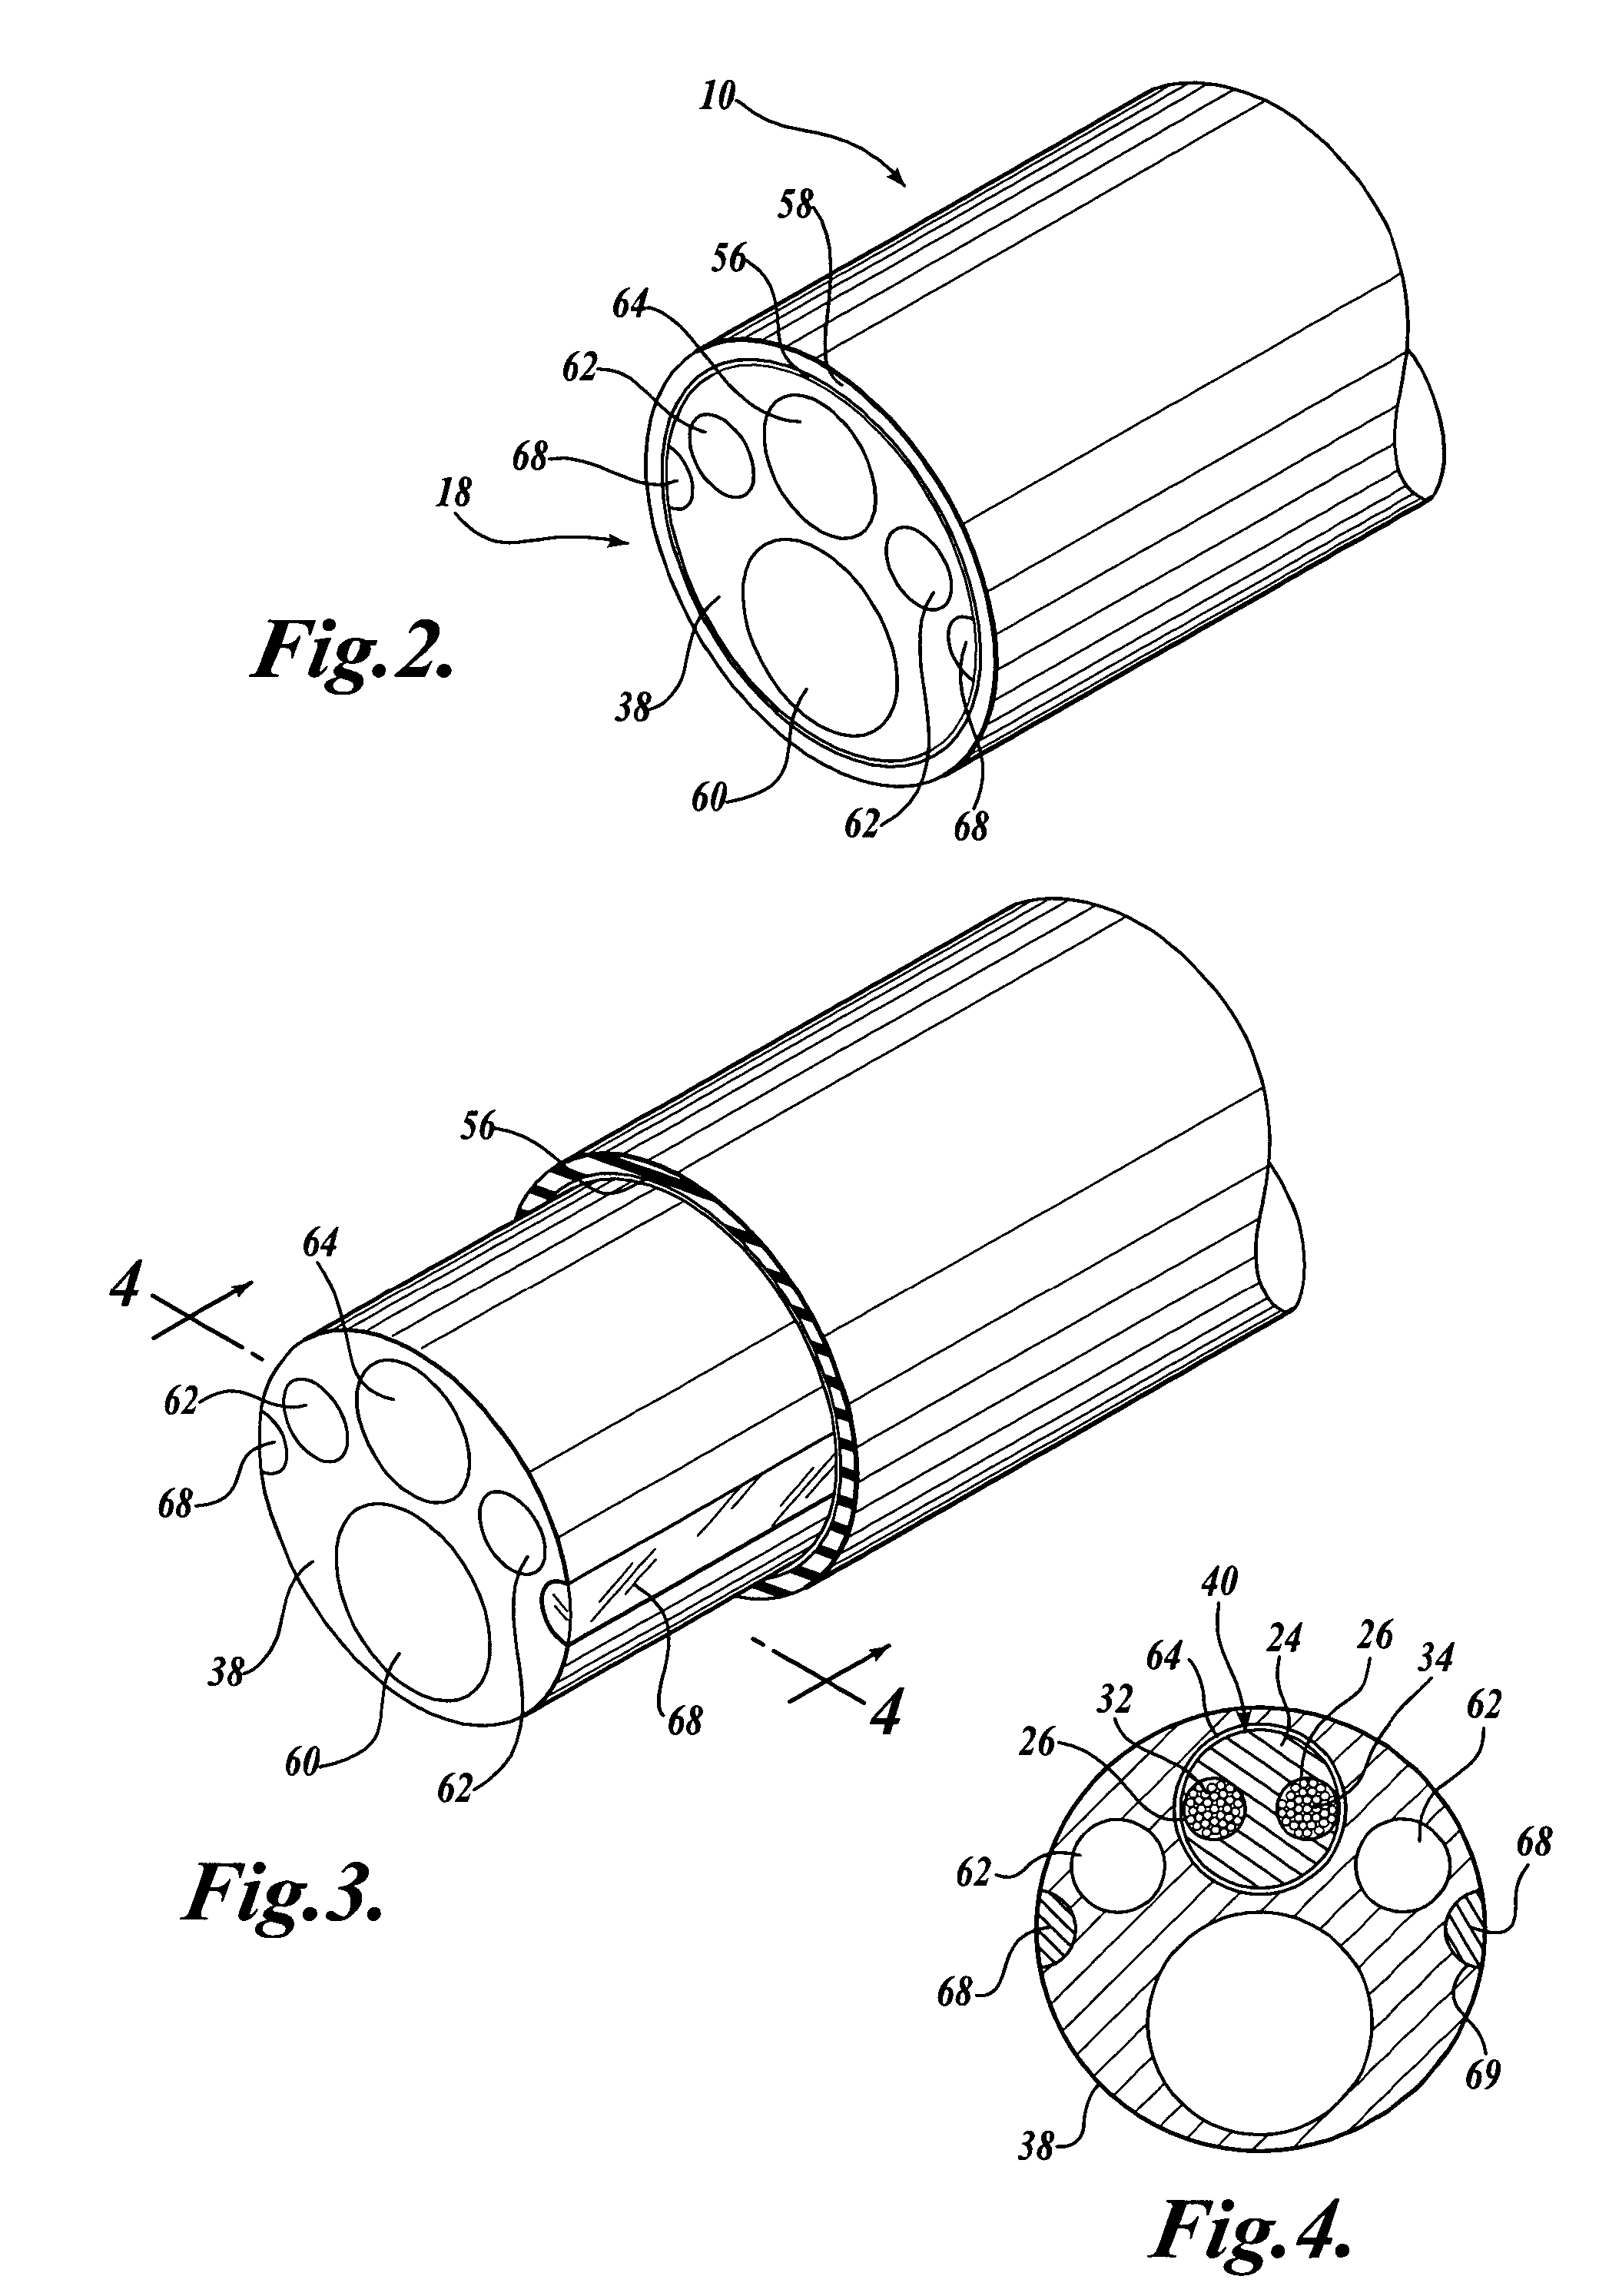 Medical visualization system with endoscope and mounted catheter